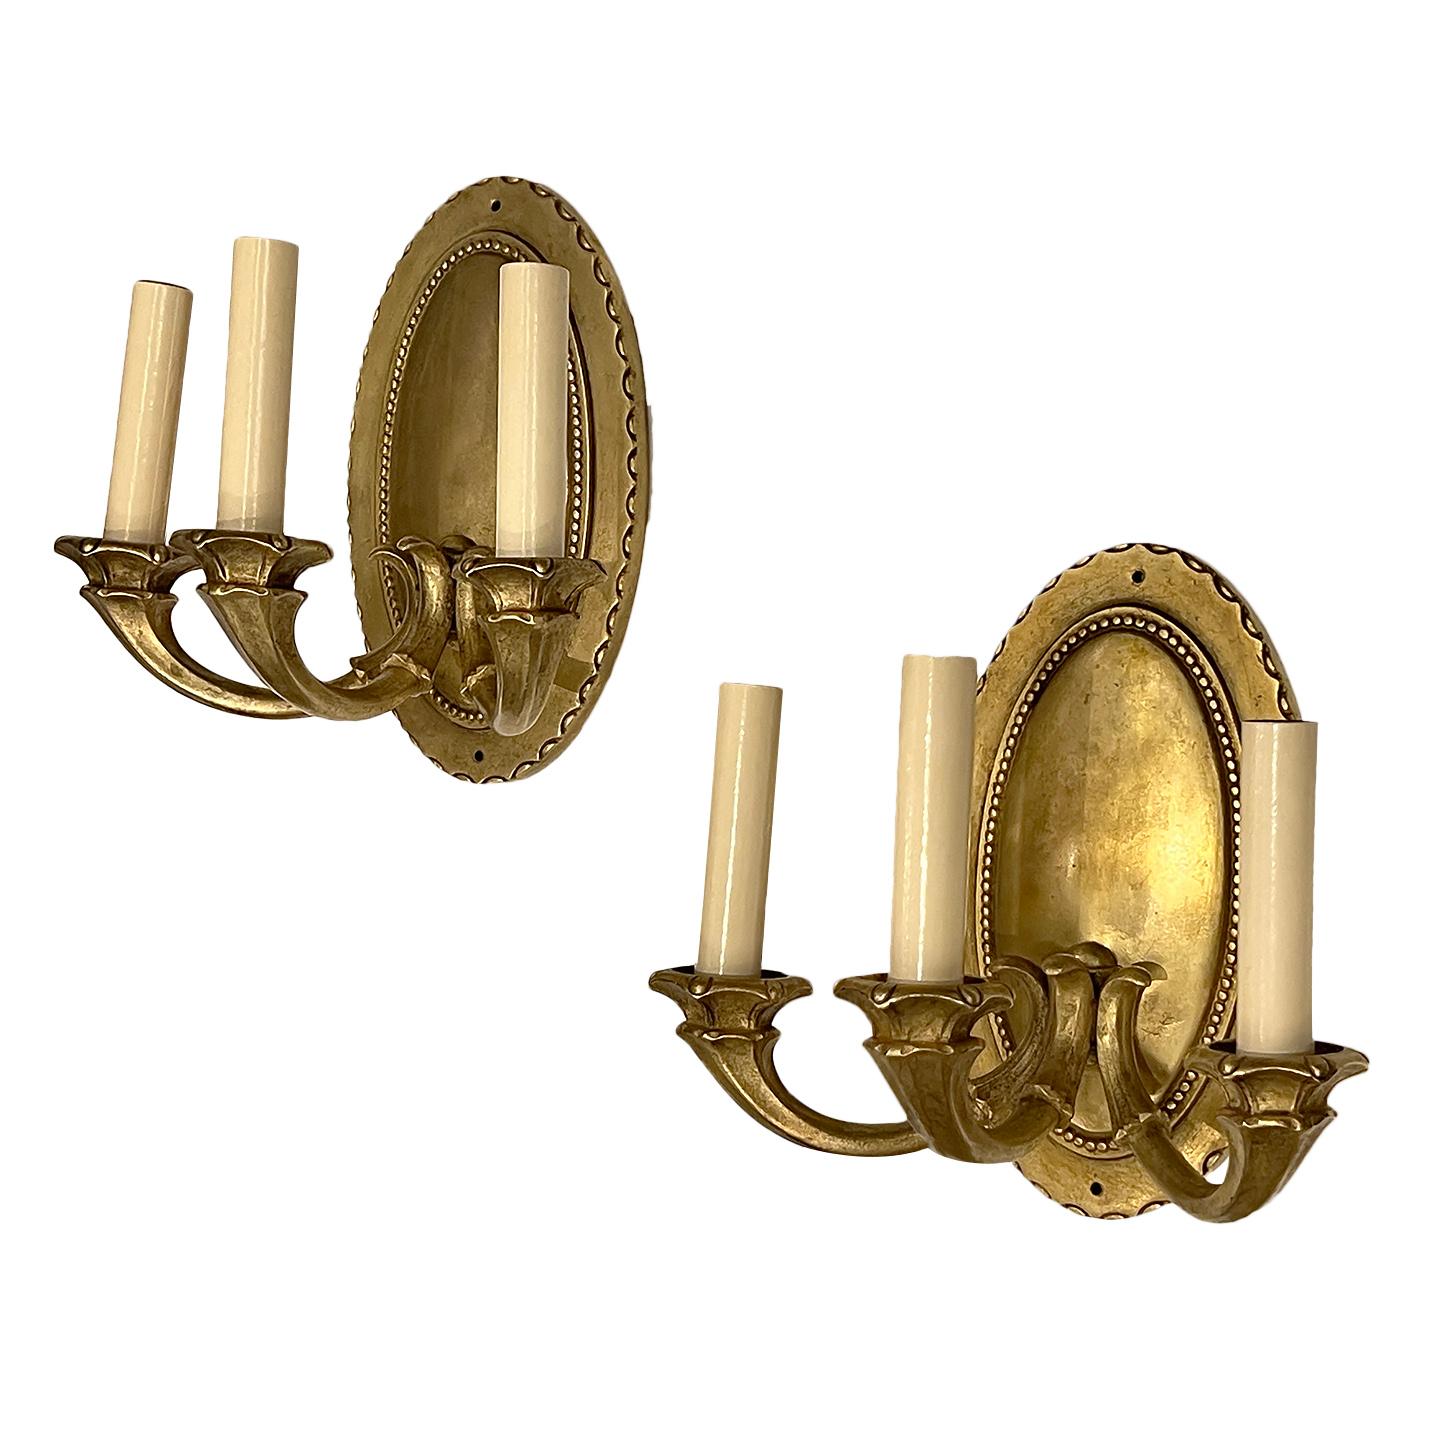 Pair of circa 1940's French oval-shaped neoclassic style  3-light sconces with gilt finish and beading detail on back plate.

Measurements:
Height: 10